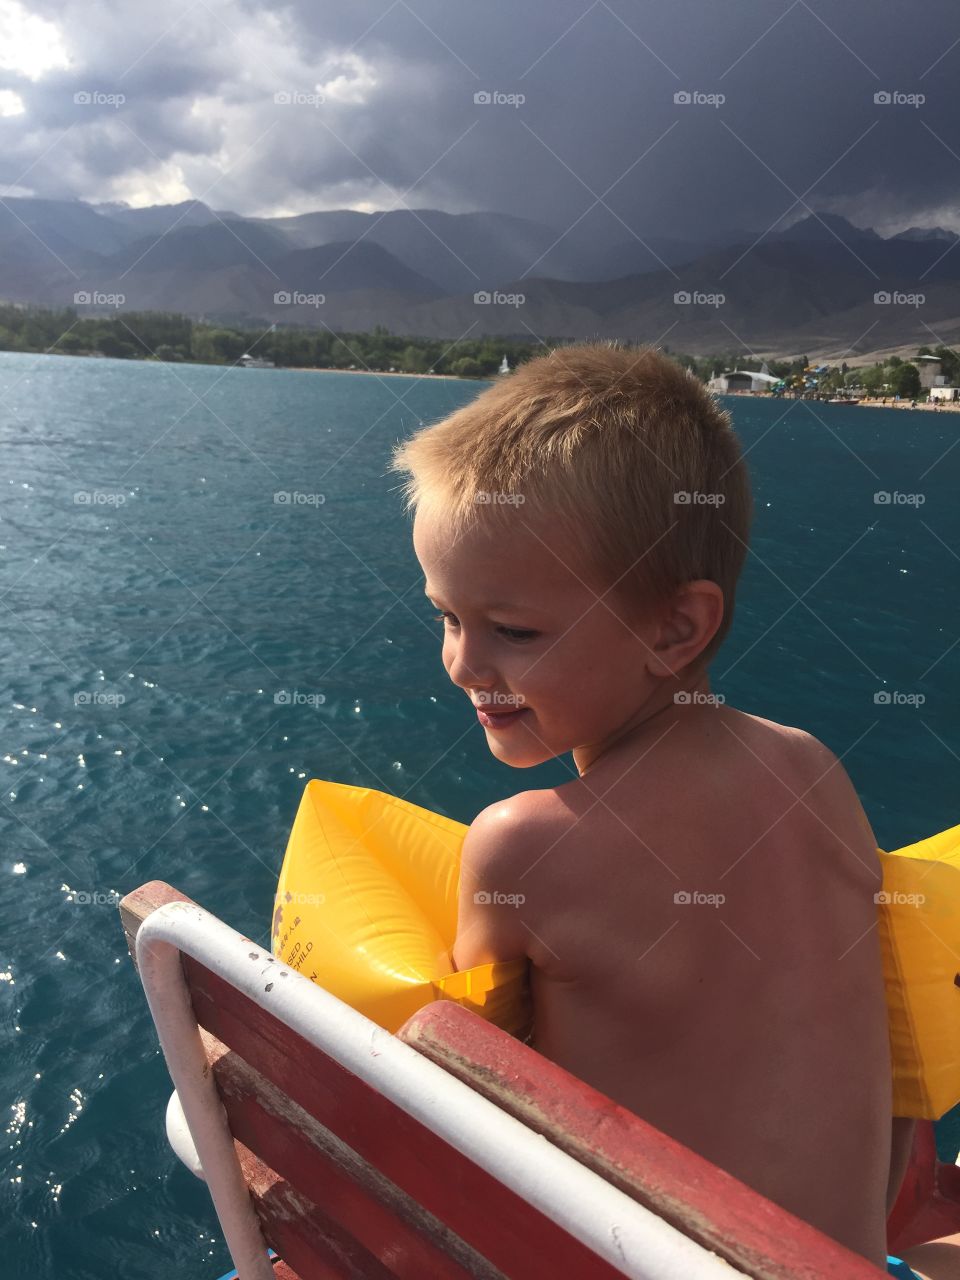 A child at sea hours before a thunderstorm